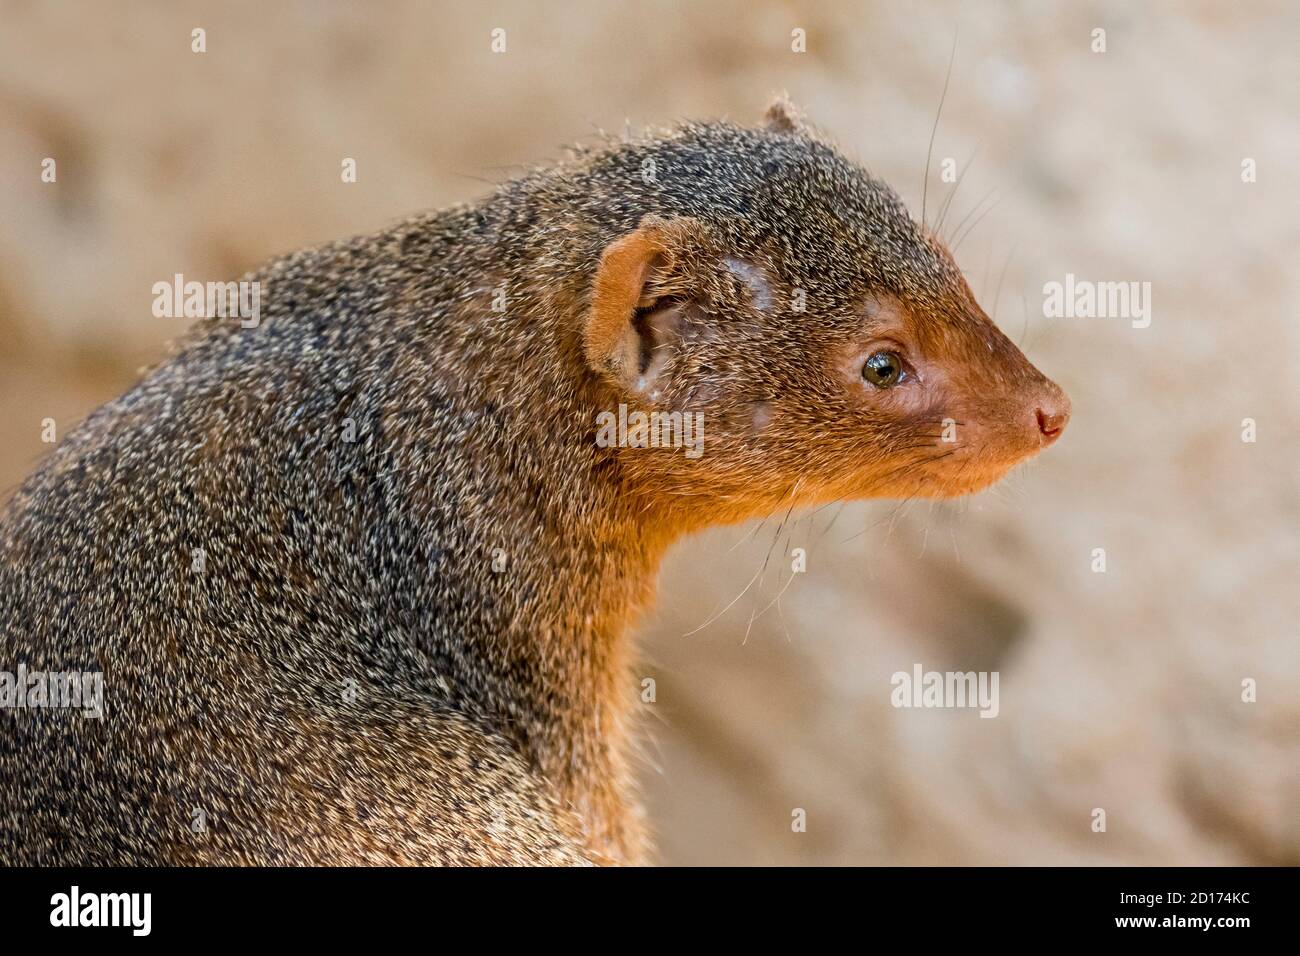 Common dwarf mongoose (Helogale parvula) close-up portrait, native to East and southern Central Africa Stock Photo